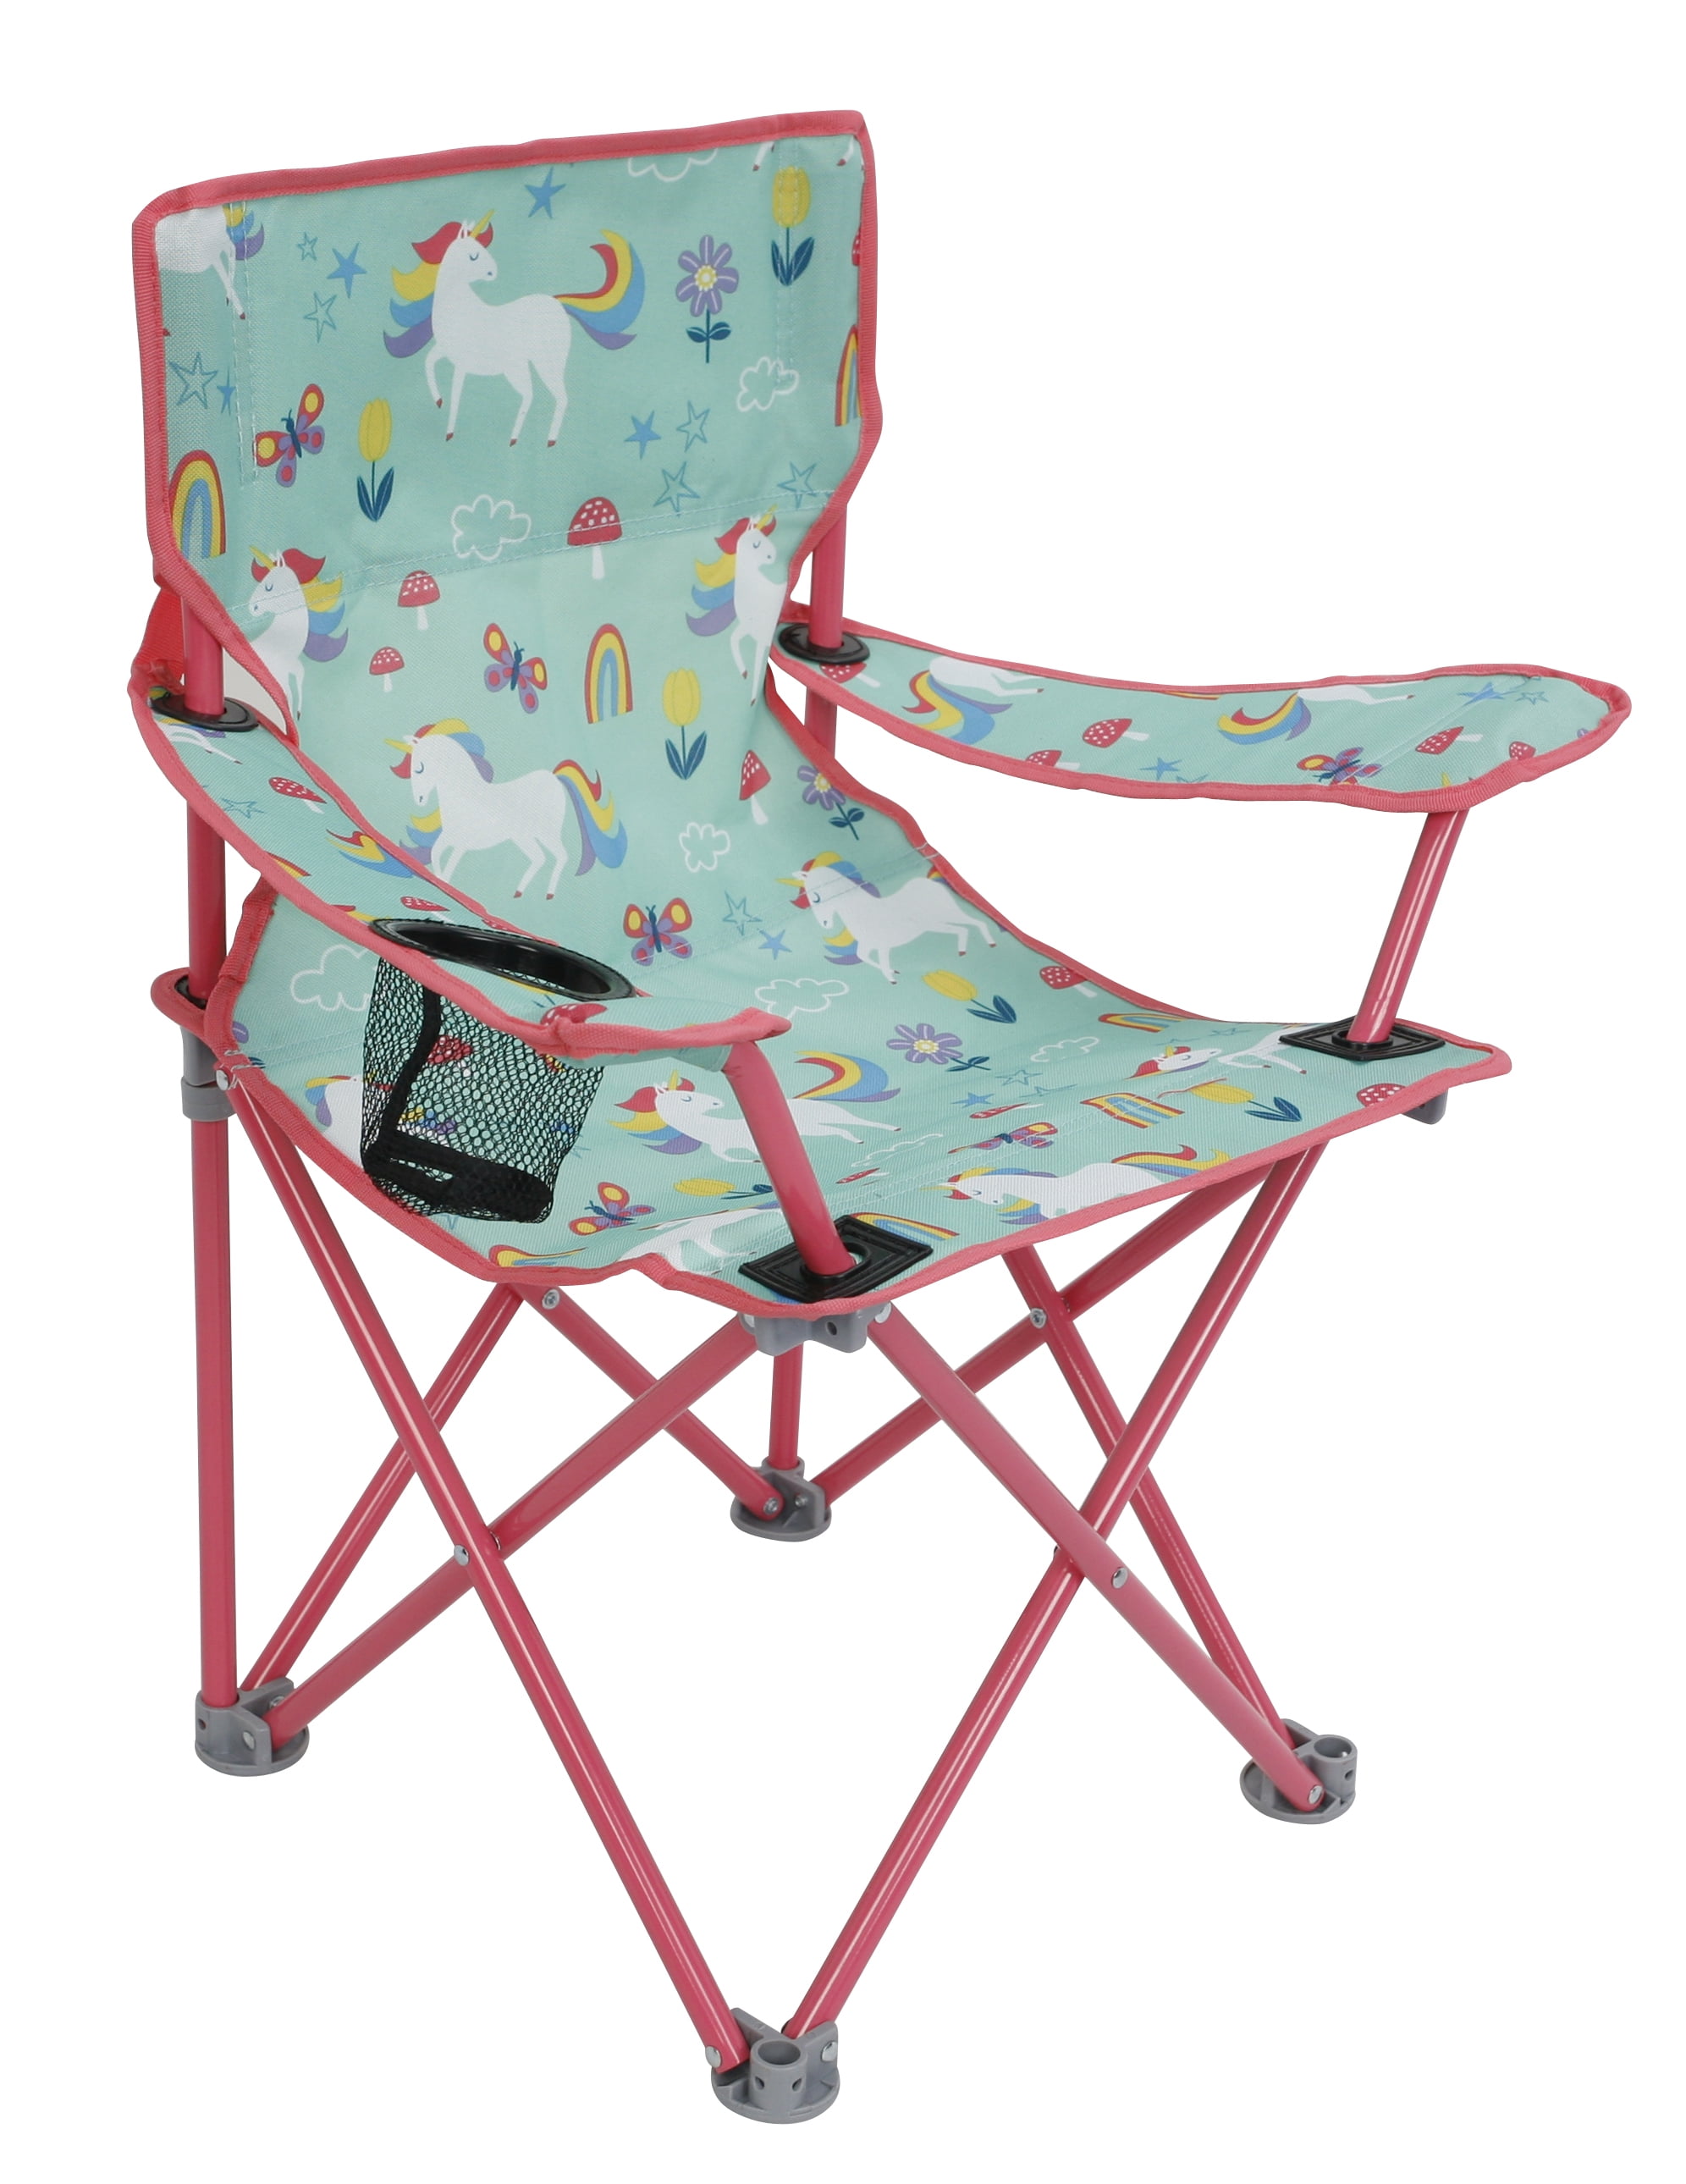 Crckt Kids Folding Camp Chair With, Children’s Chairs With Arms